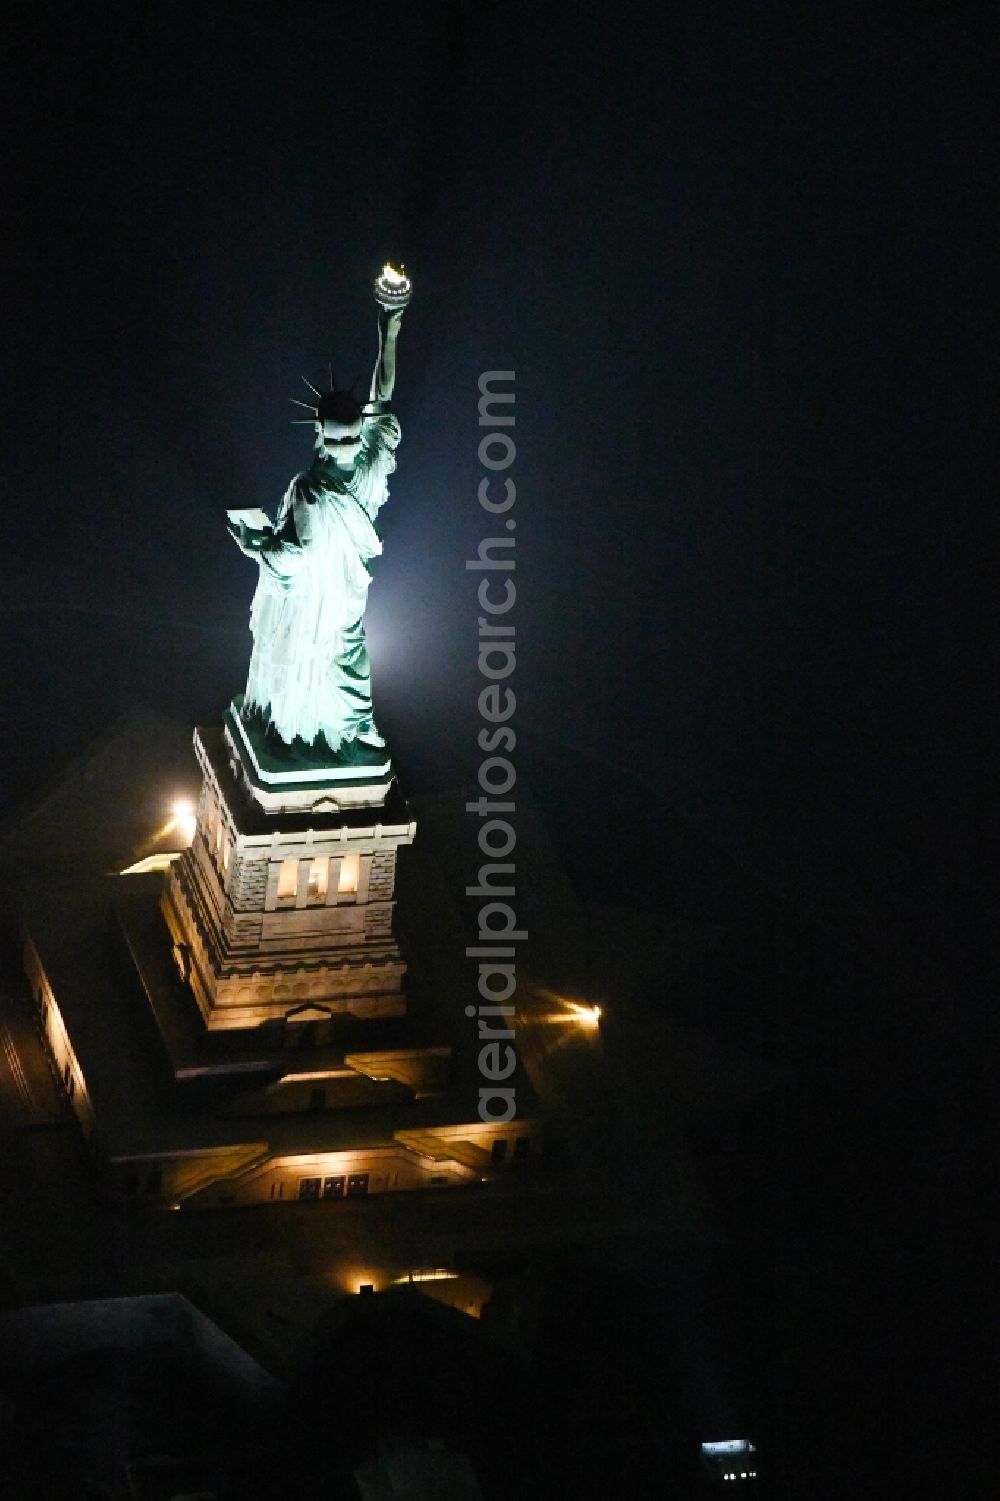 New York at night from above - Night lighting Tourist attraction of the historic monument Freiheitsstatue - Statue of Liberty National Monument in the district Manhattan in New York in United States of America